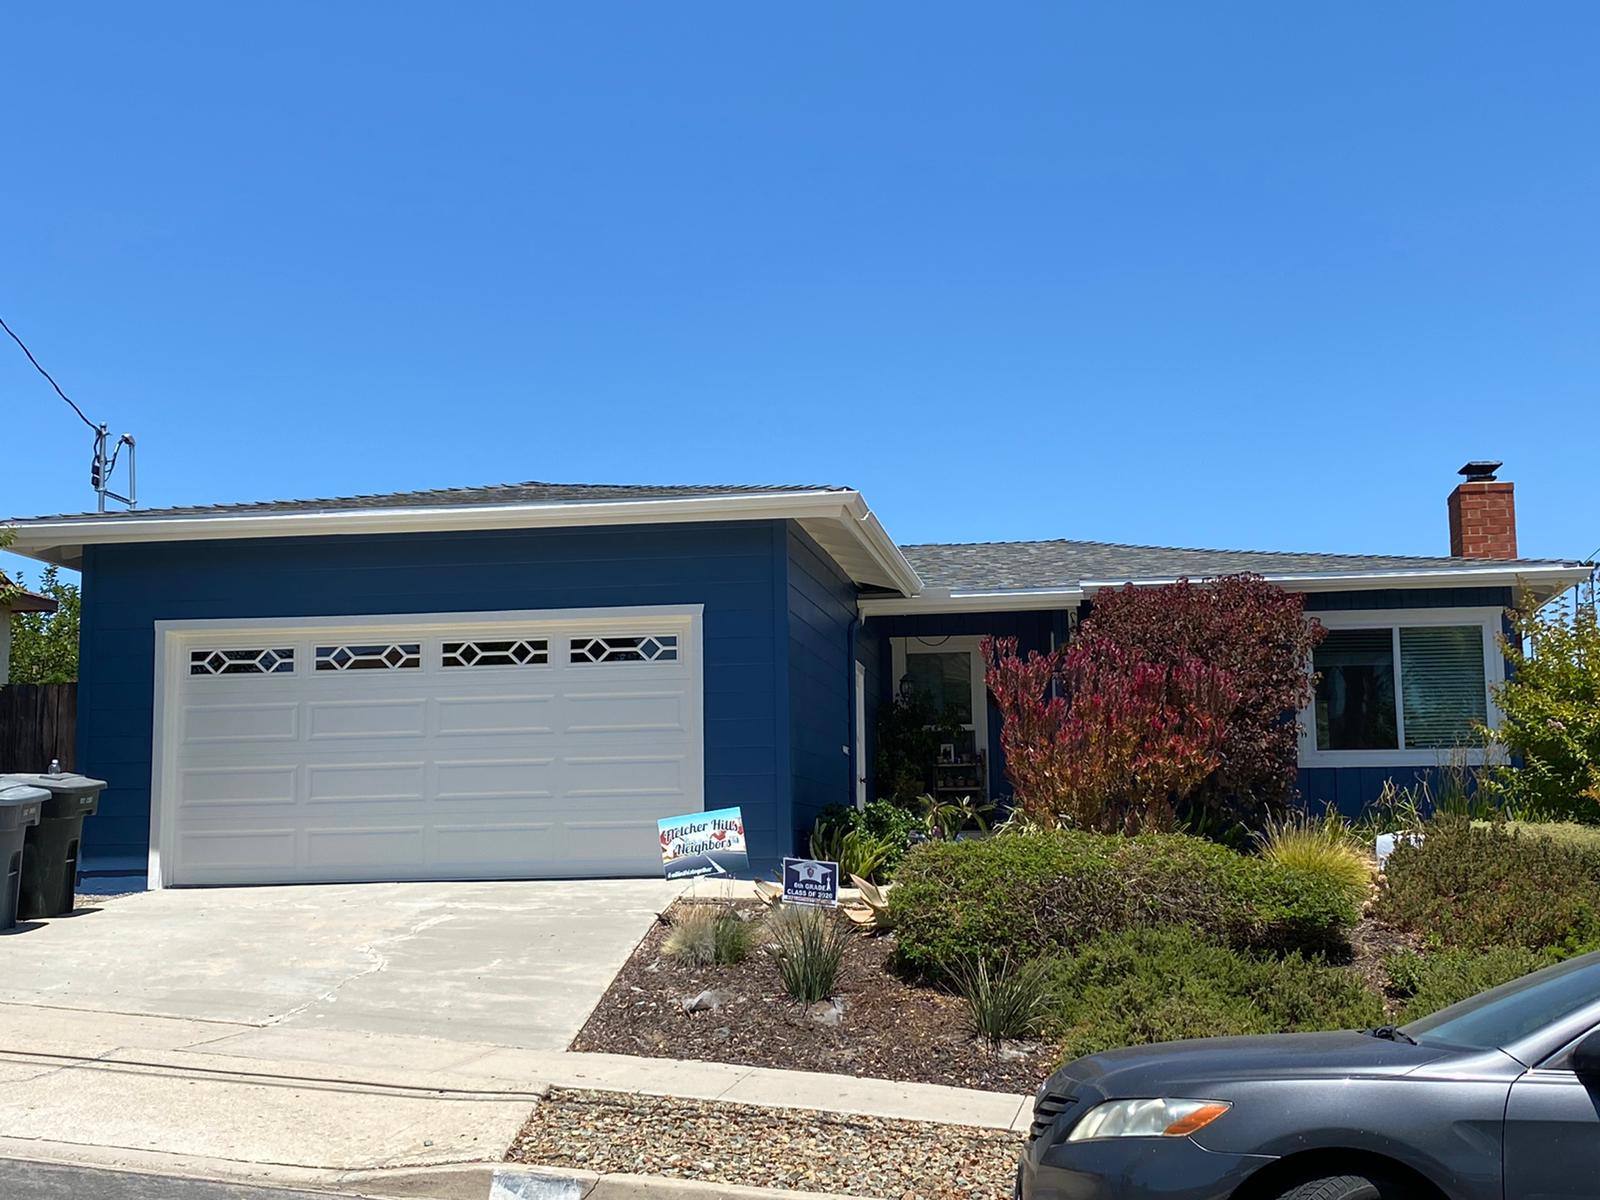 House Painting in San Diego